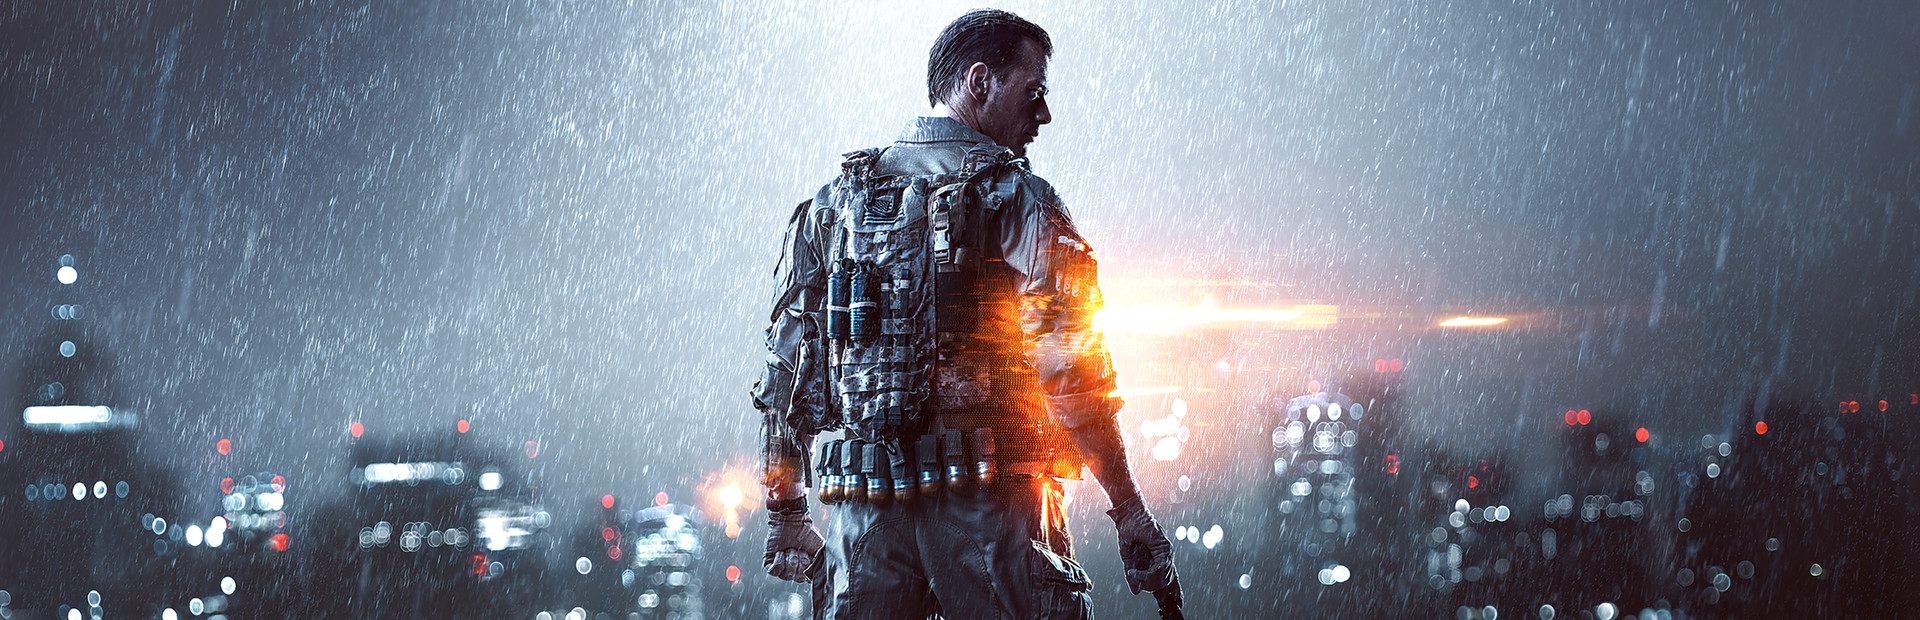 Battlefield 4™ cover image